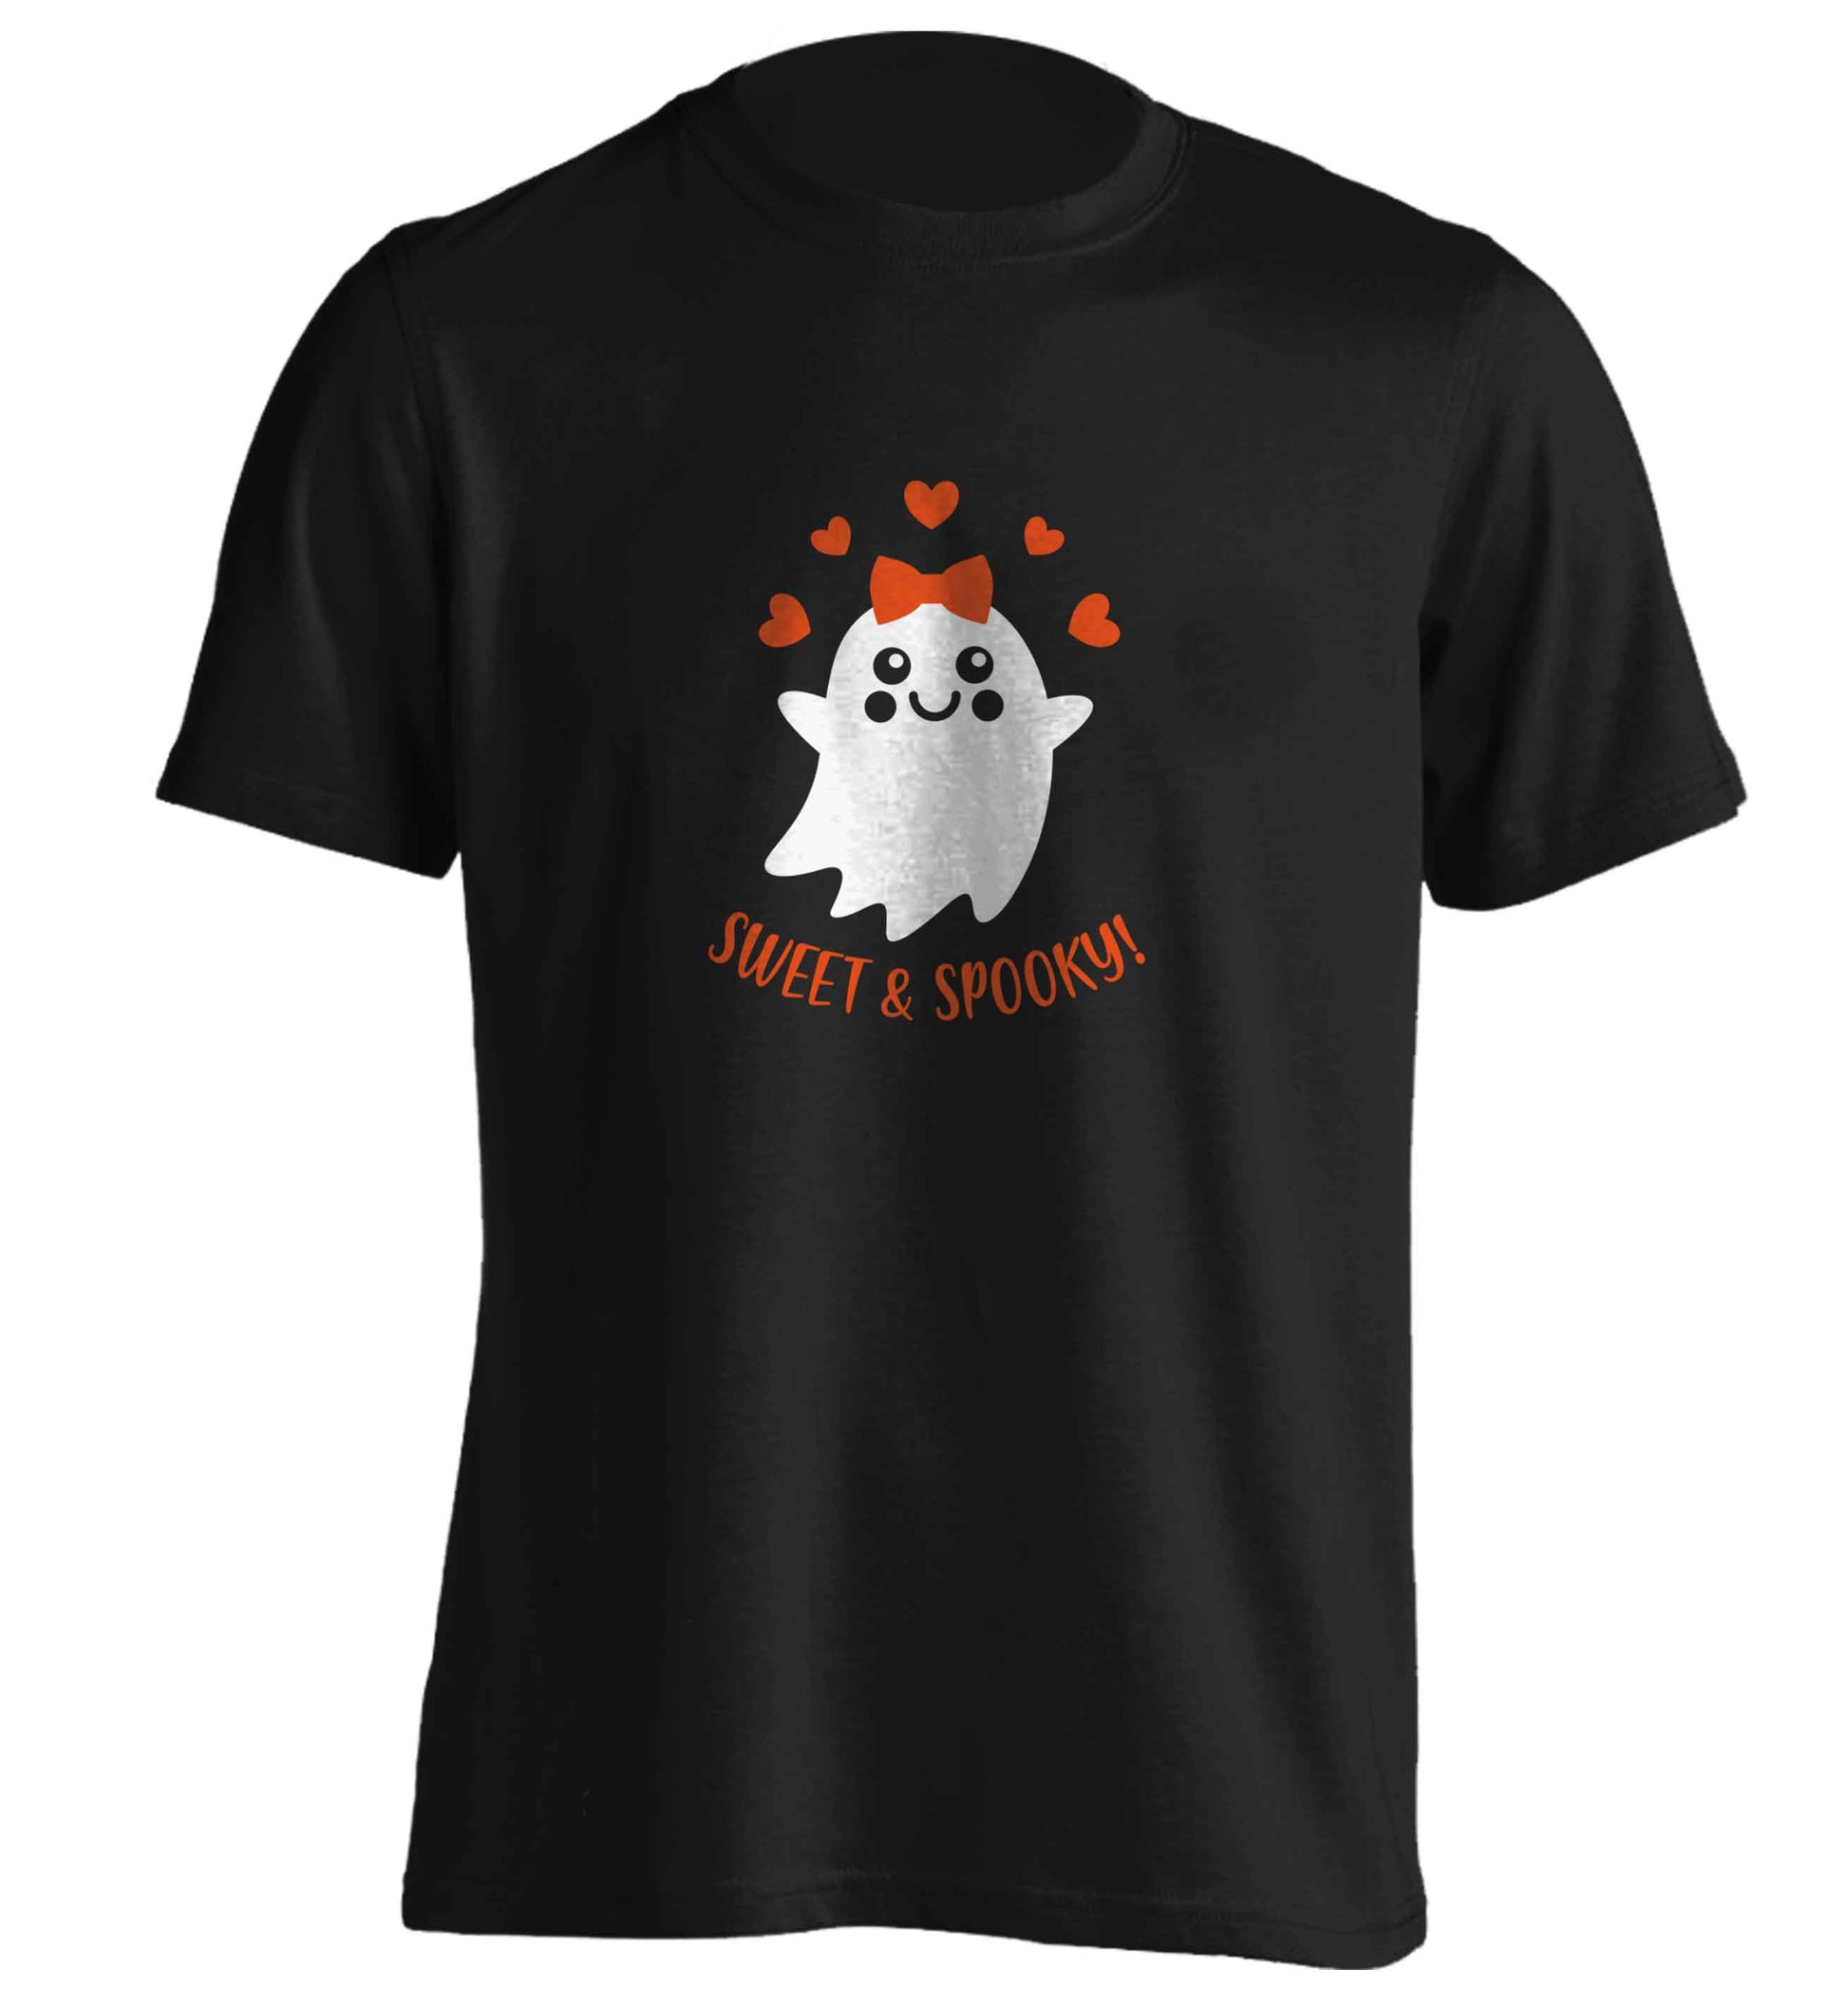 Sweet and spooky adults unisex black Tshirt 2XL